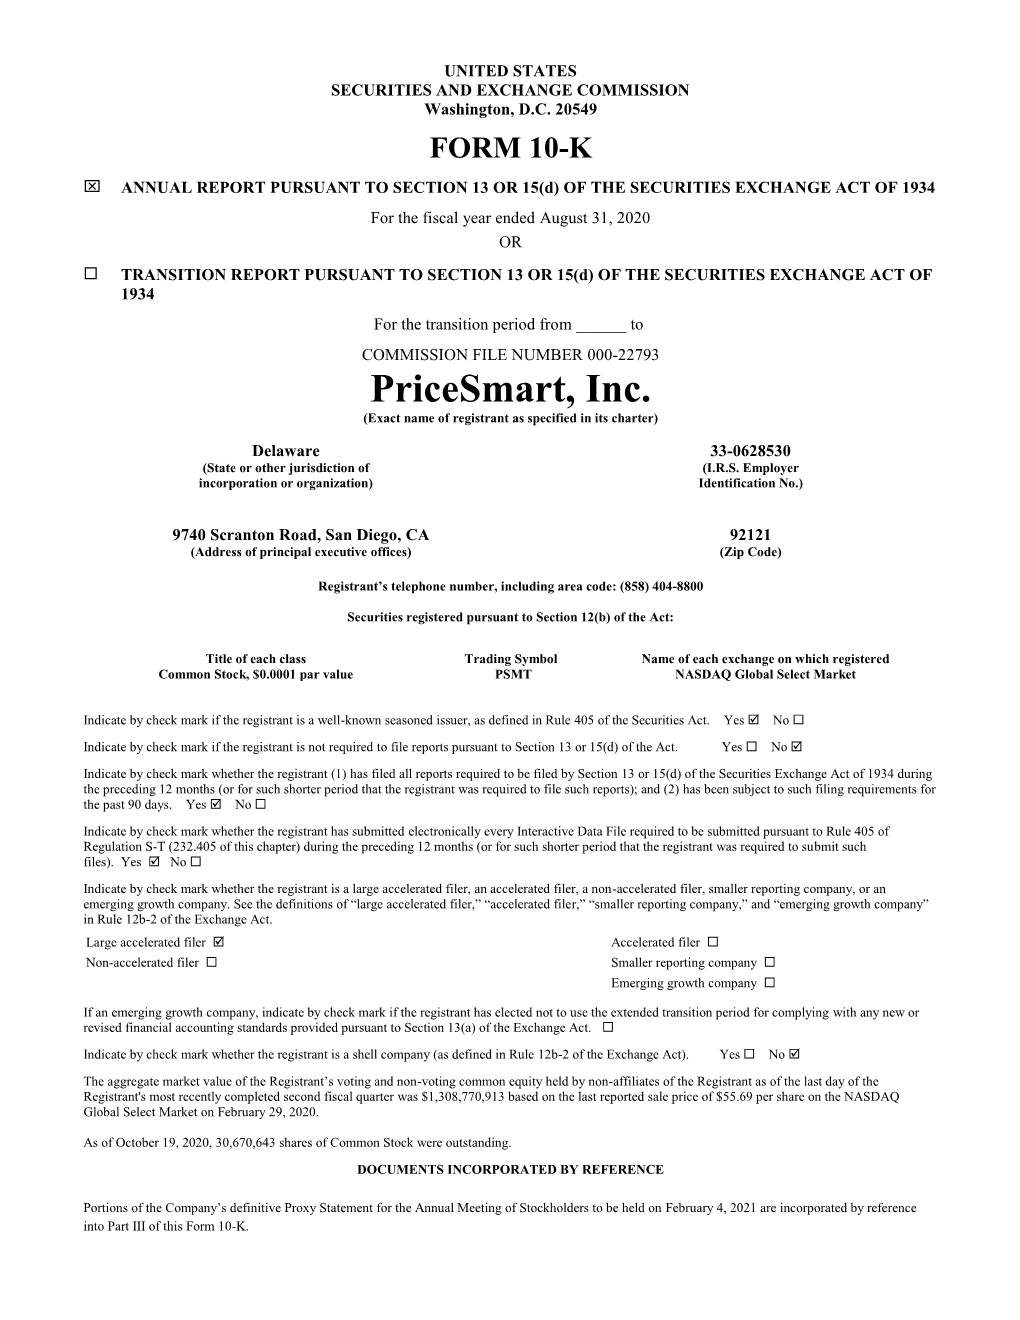 Pricesmart, Inc. (Exact Name of Registrant As Specified in Its Charter)